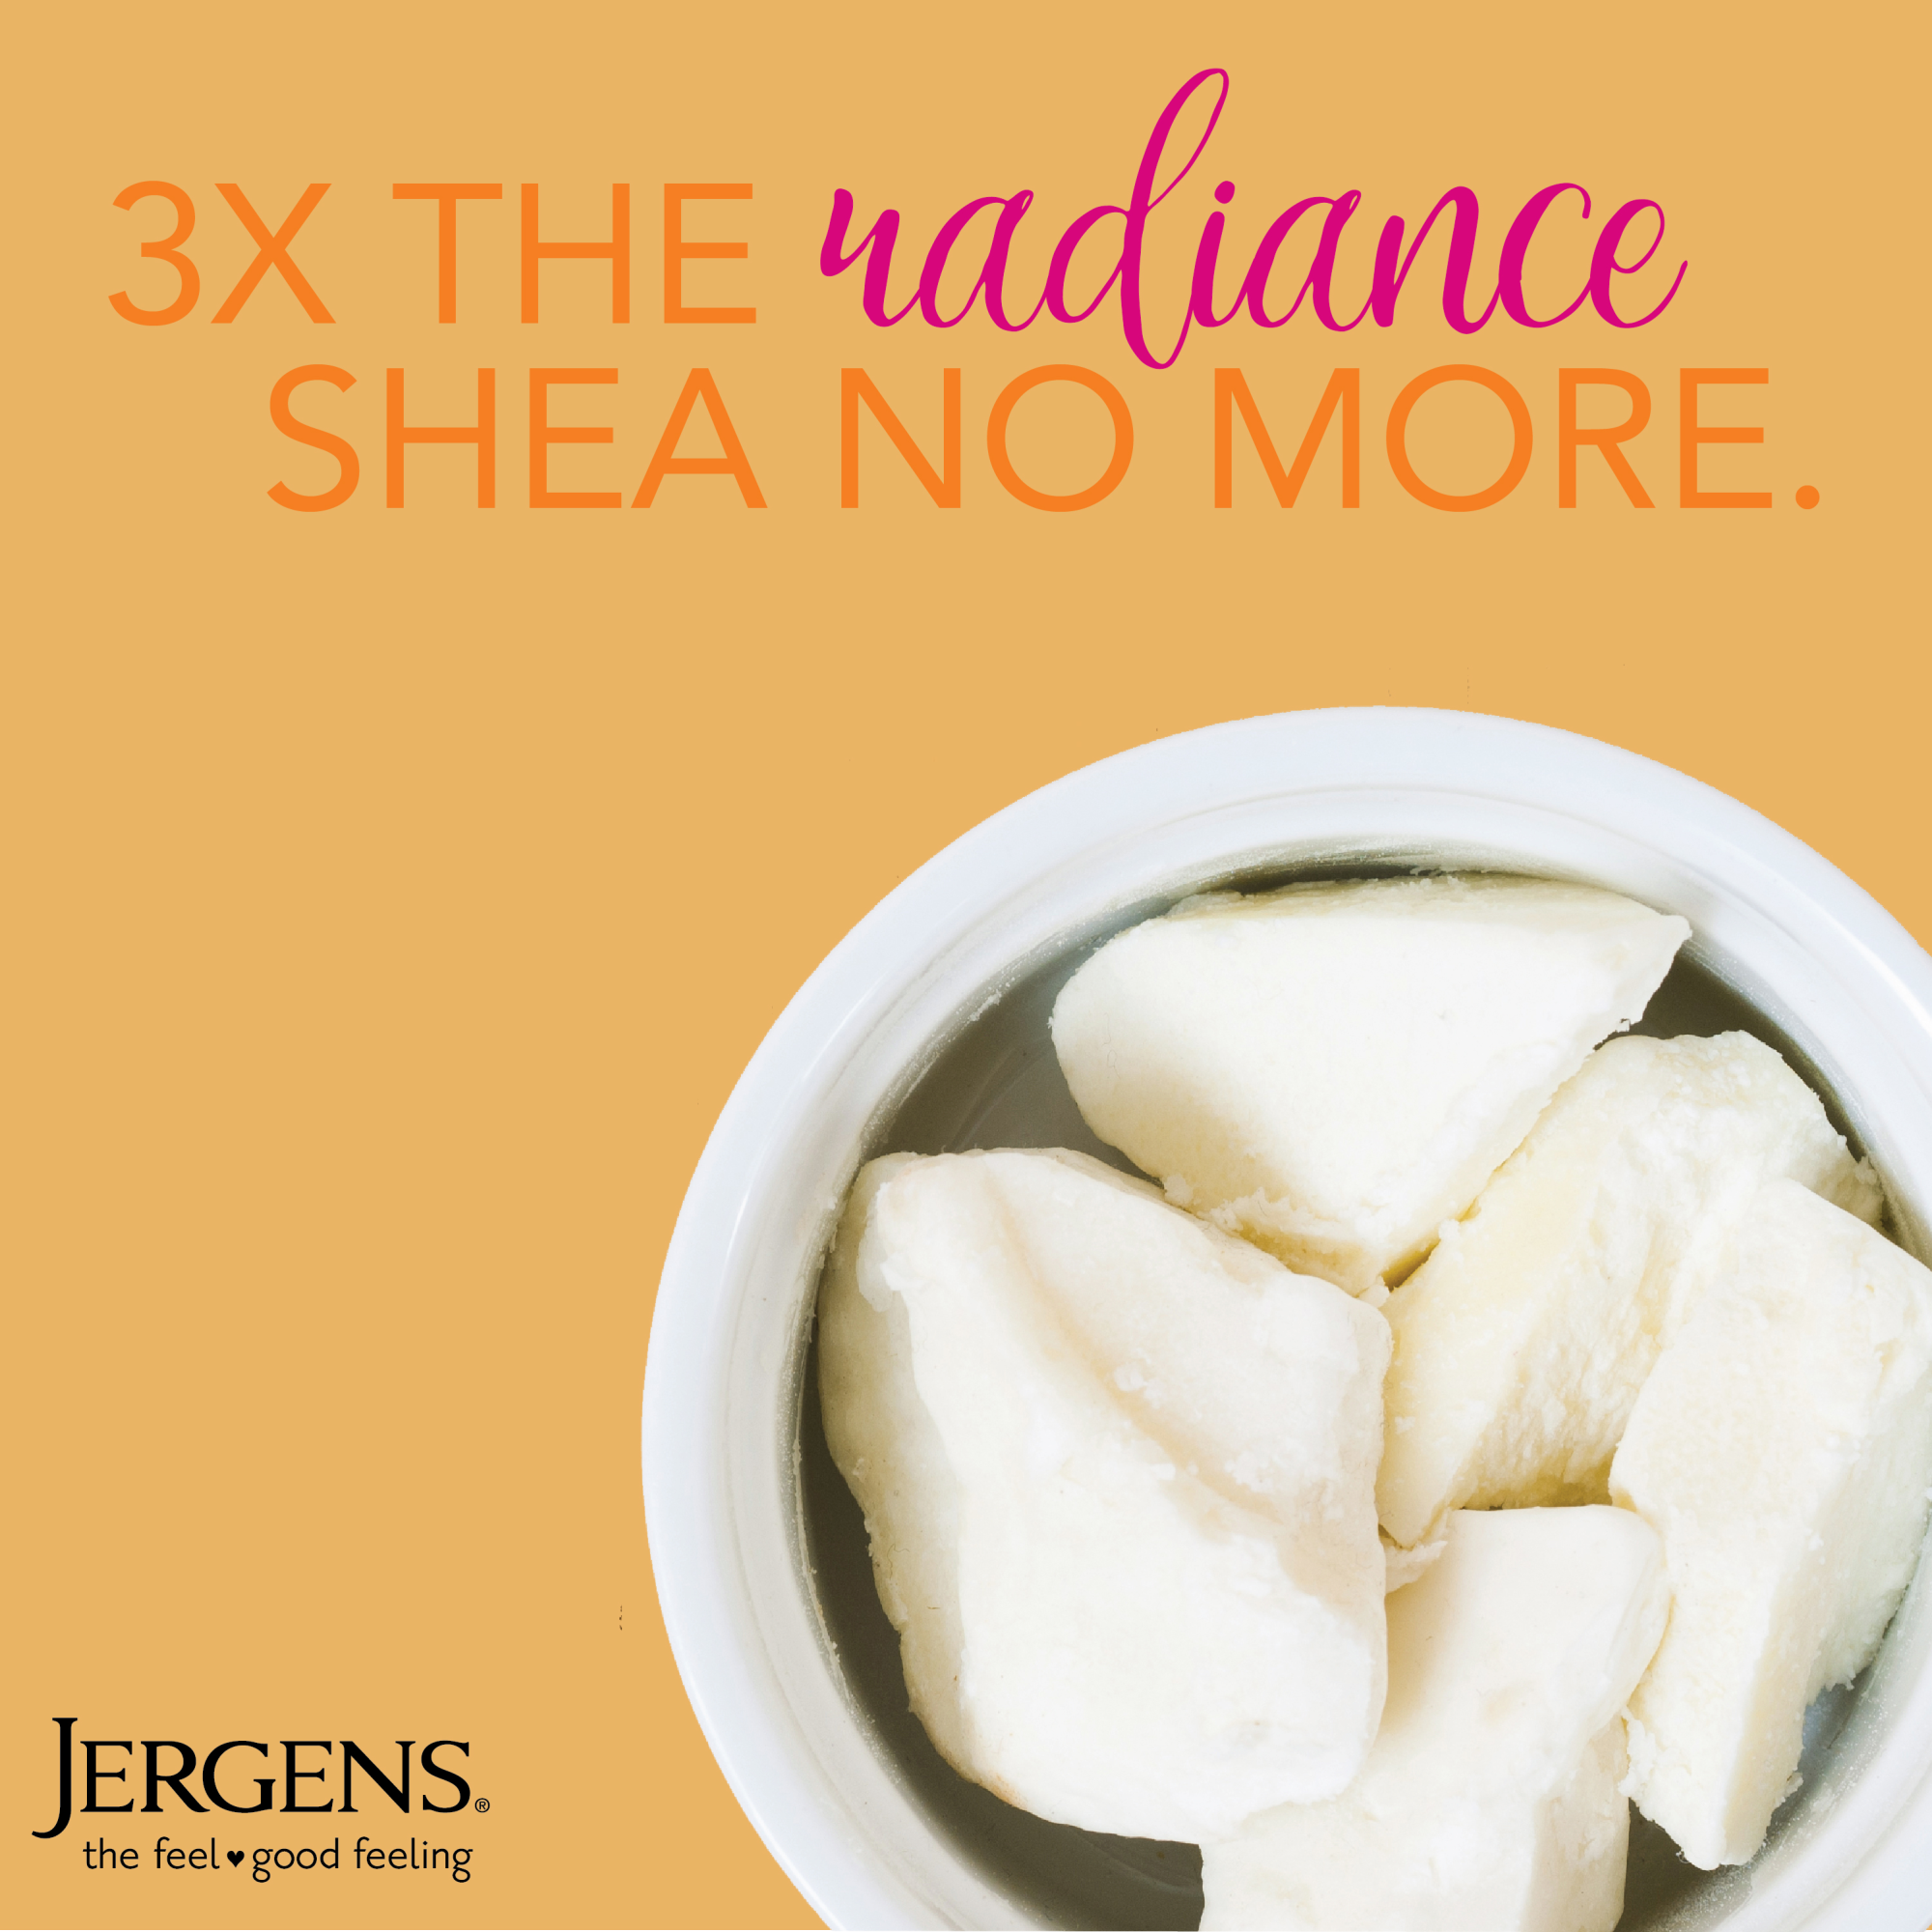 3X the radiance shea no more.